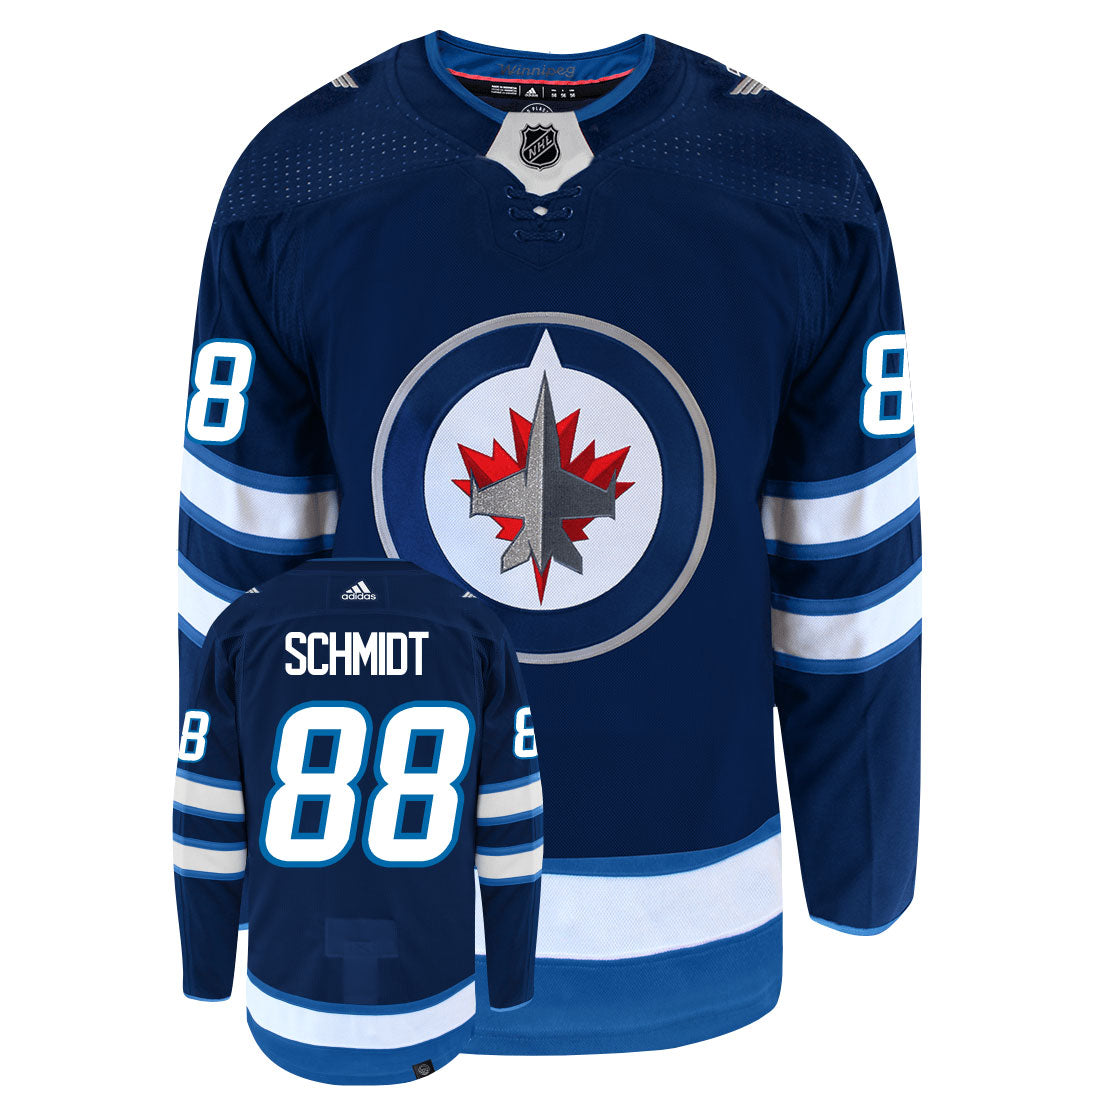 Nate Schmidt Winnipeg Jets Adidas Primegreen Authentic Home NHL Hockey Jersey - Front/Back View